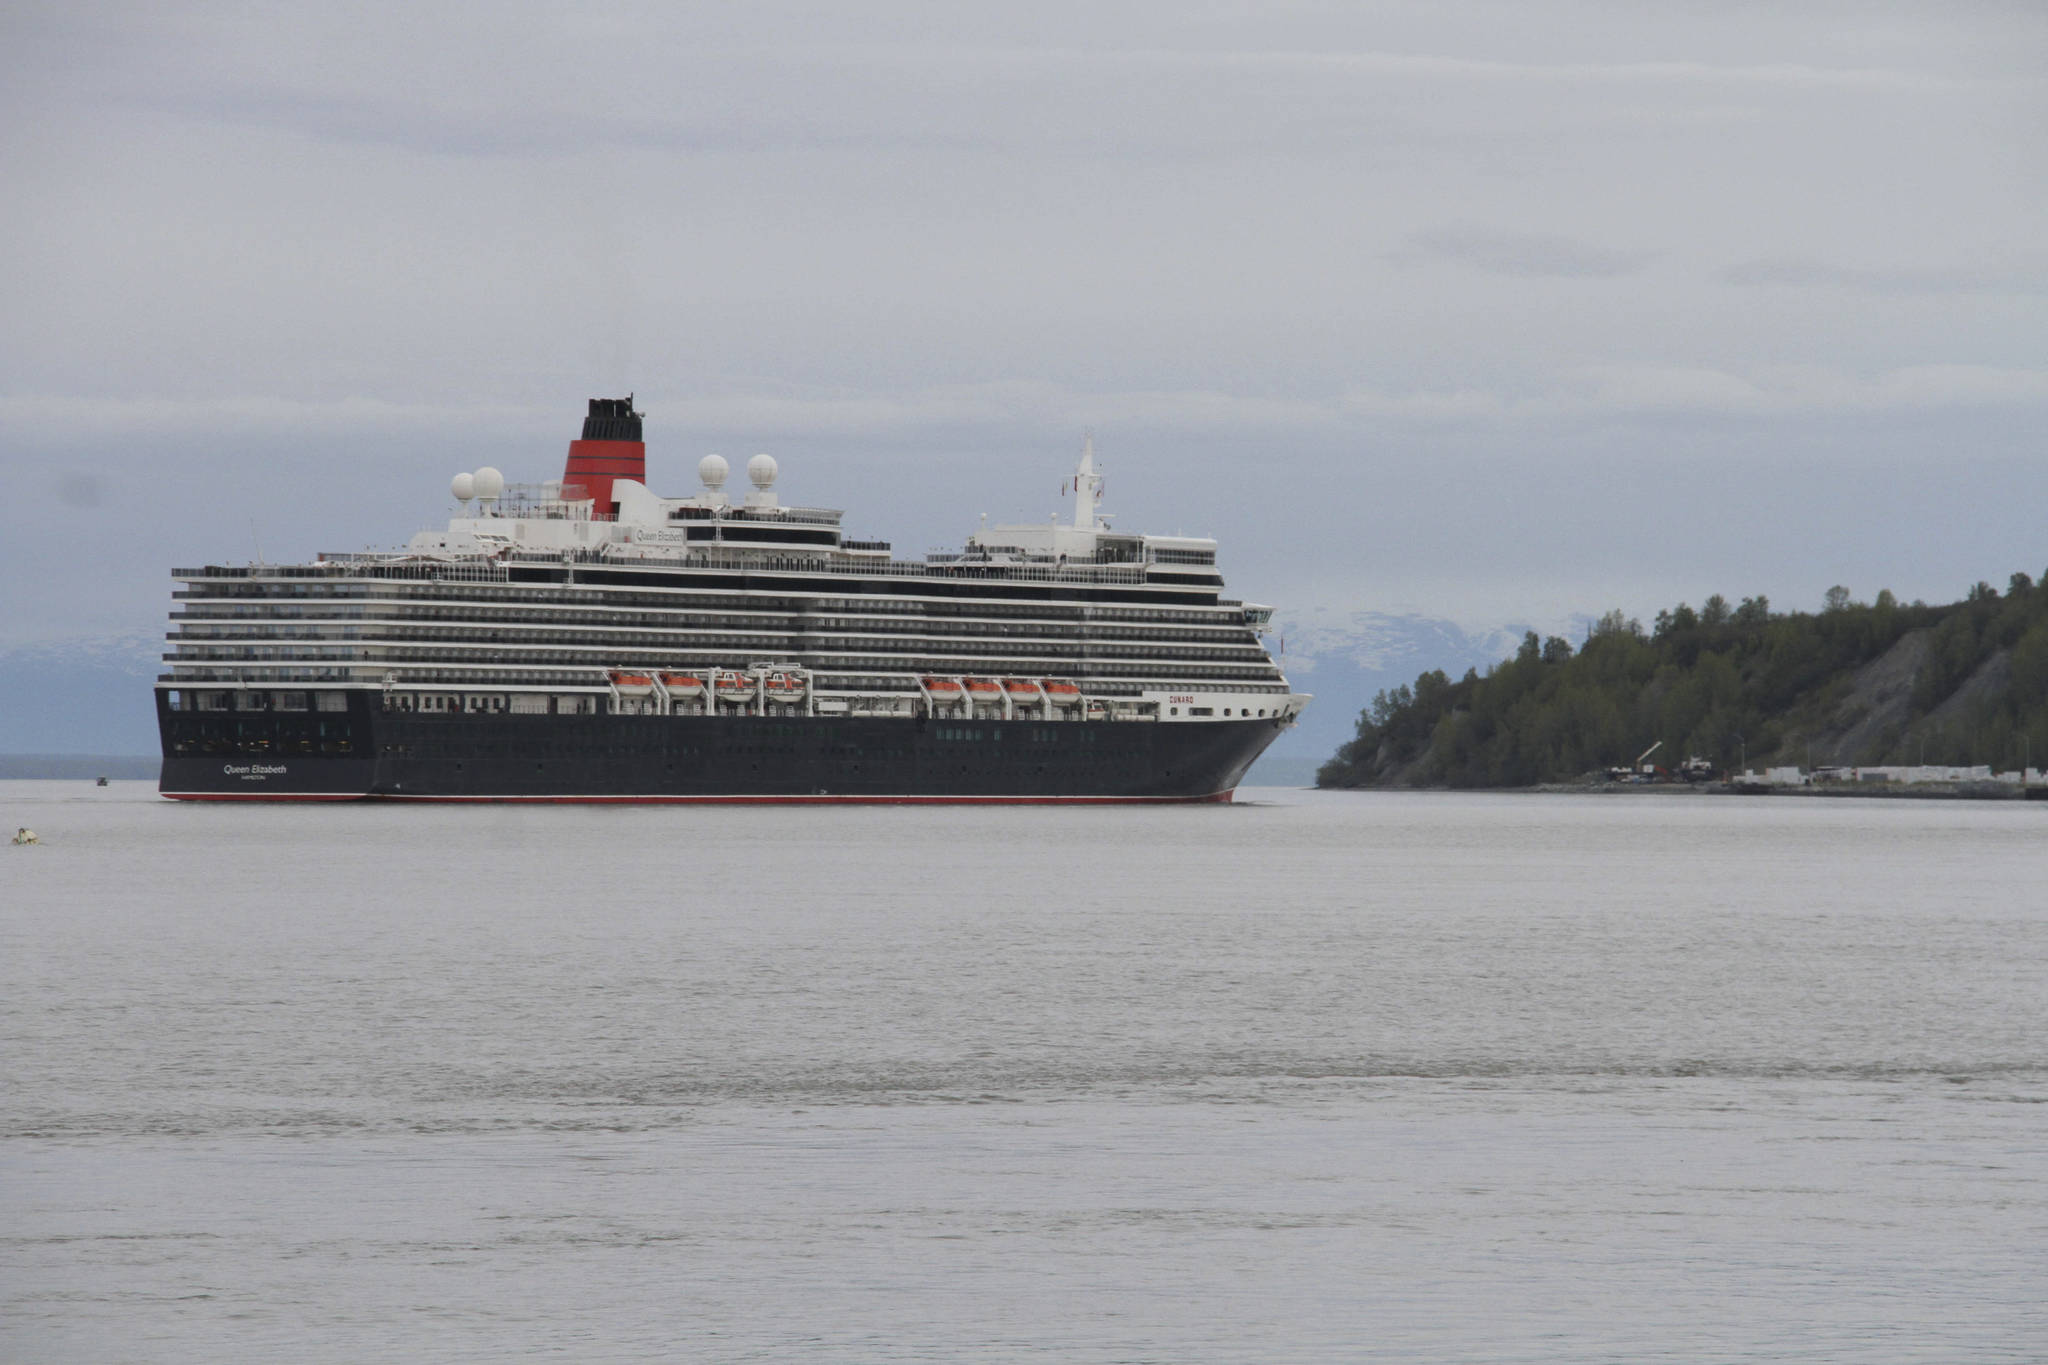 The Cunard cruise ship Queen Elizabeth sails through Cook Inlet Thursday, May 16, 2019, for a port call in Anchorage. Federal officials say a lawsuit in Florida could block cruise ships from visiting Alaska in summer 2021. (AP Photo / Mark Thiessen)